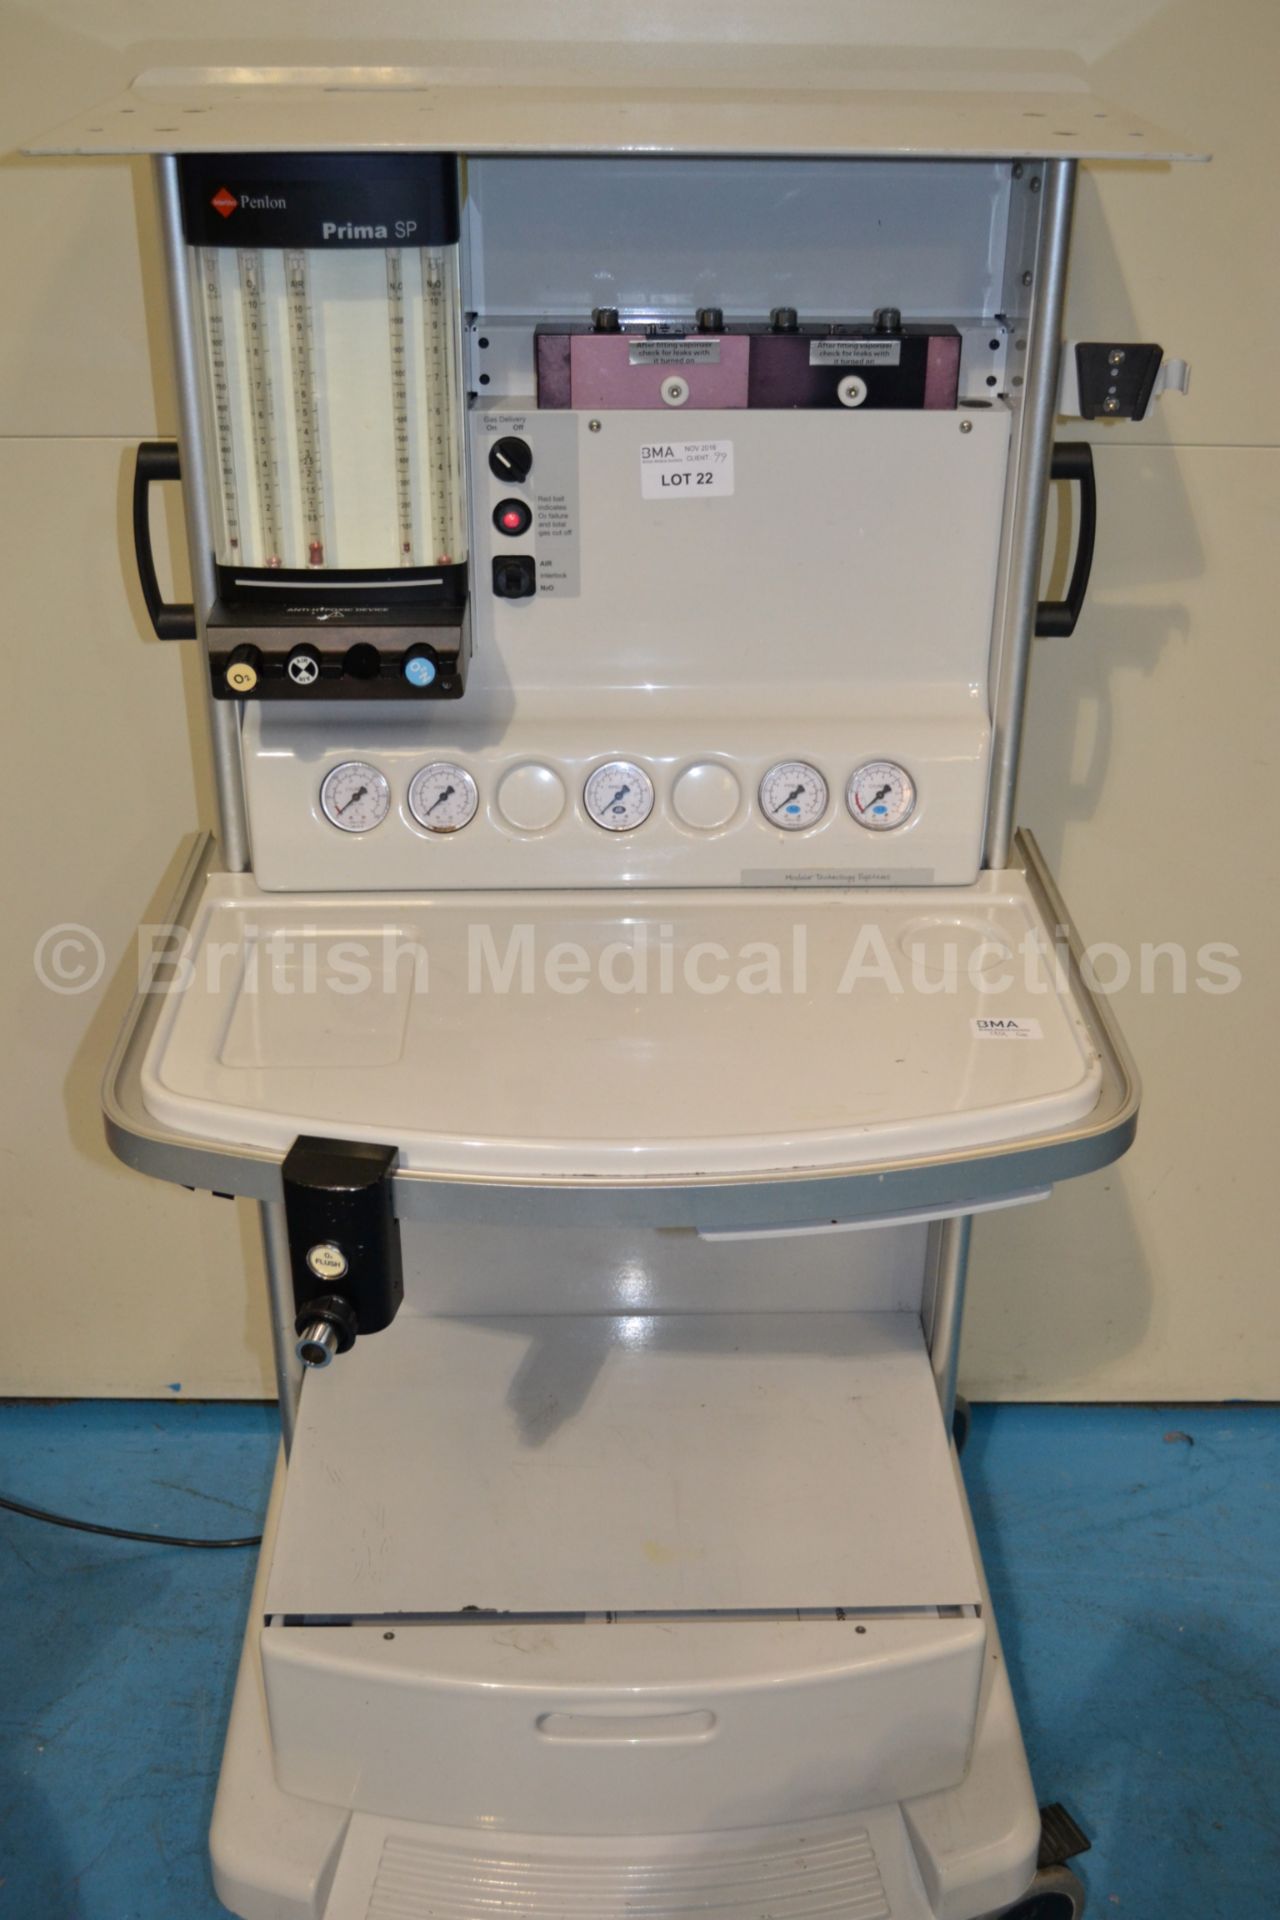 Penlon Prima SP Anaesthesia System with Hoses (GH) - Image 2 of 5